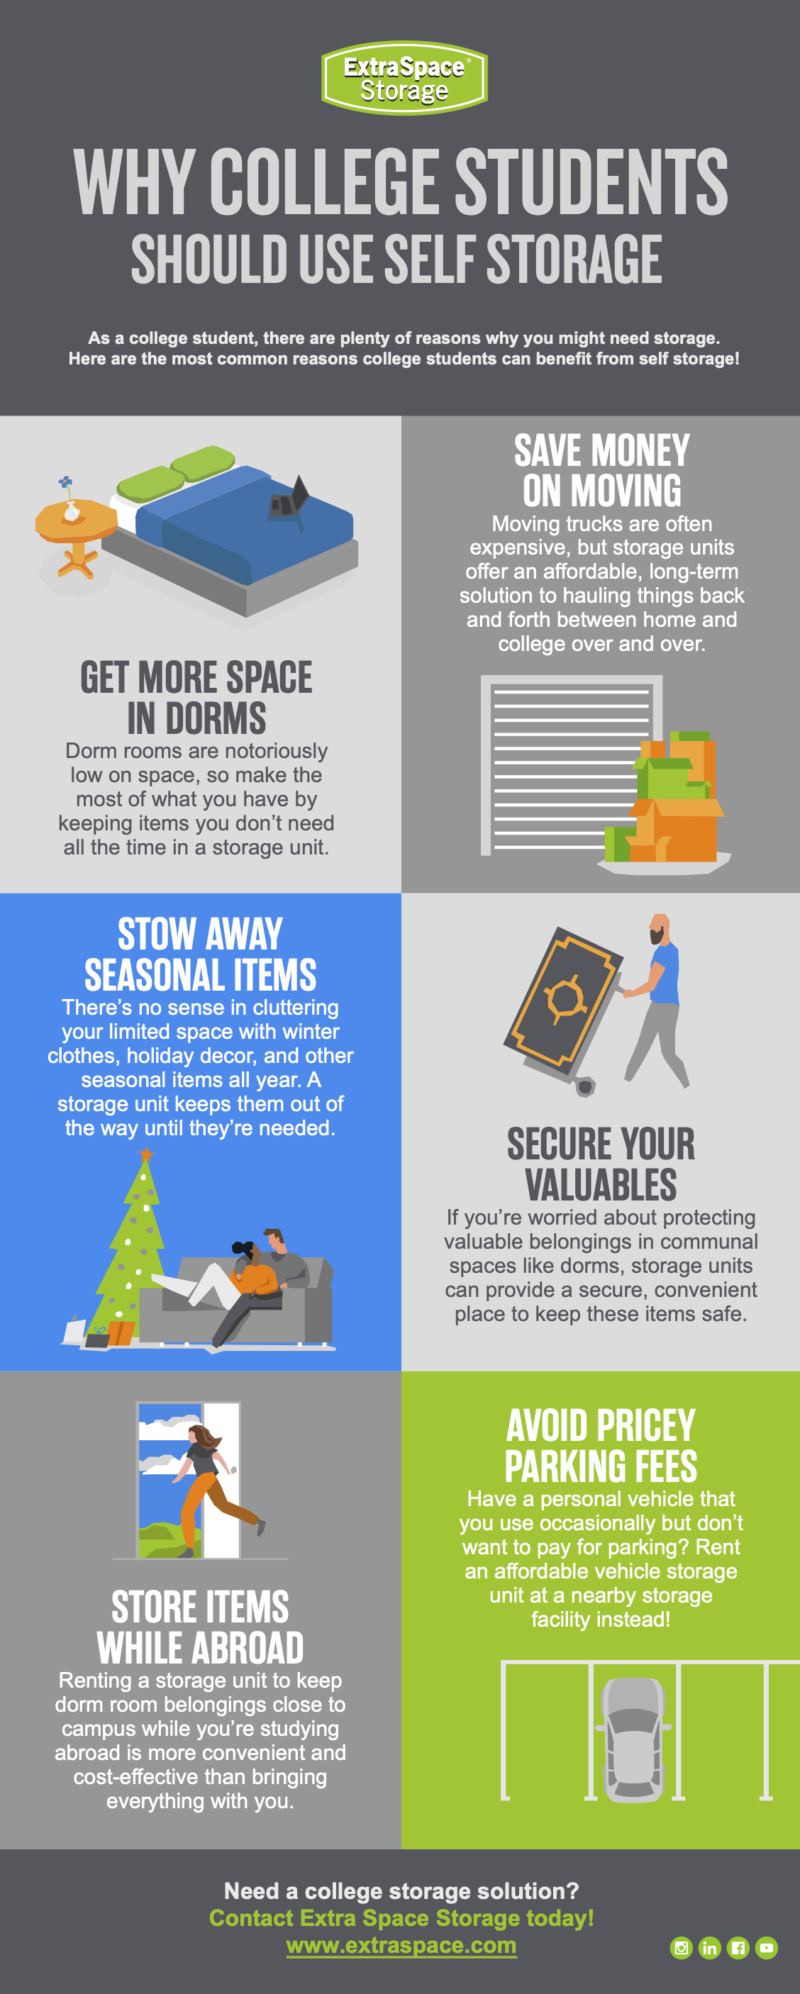 Infographic Describing the Reasons Why College Students Should Use Self Storage